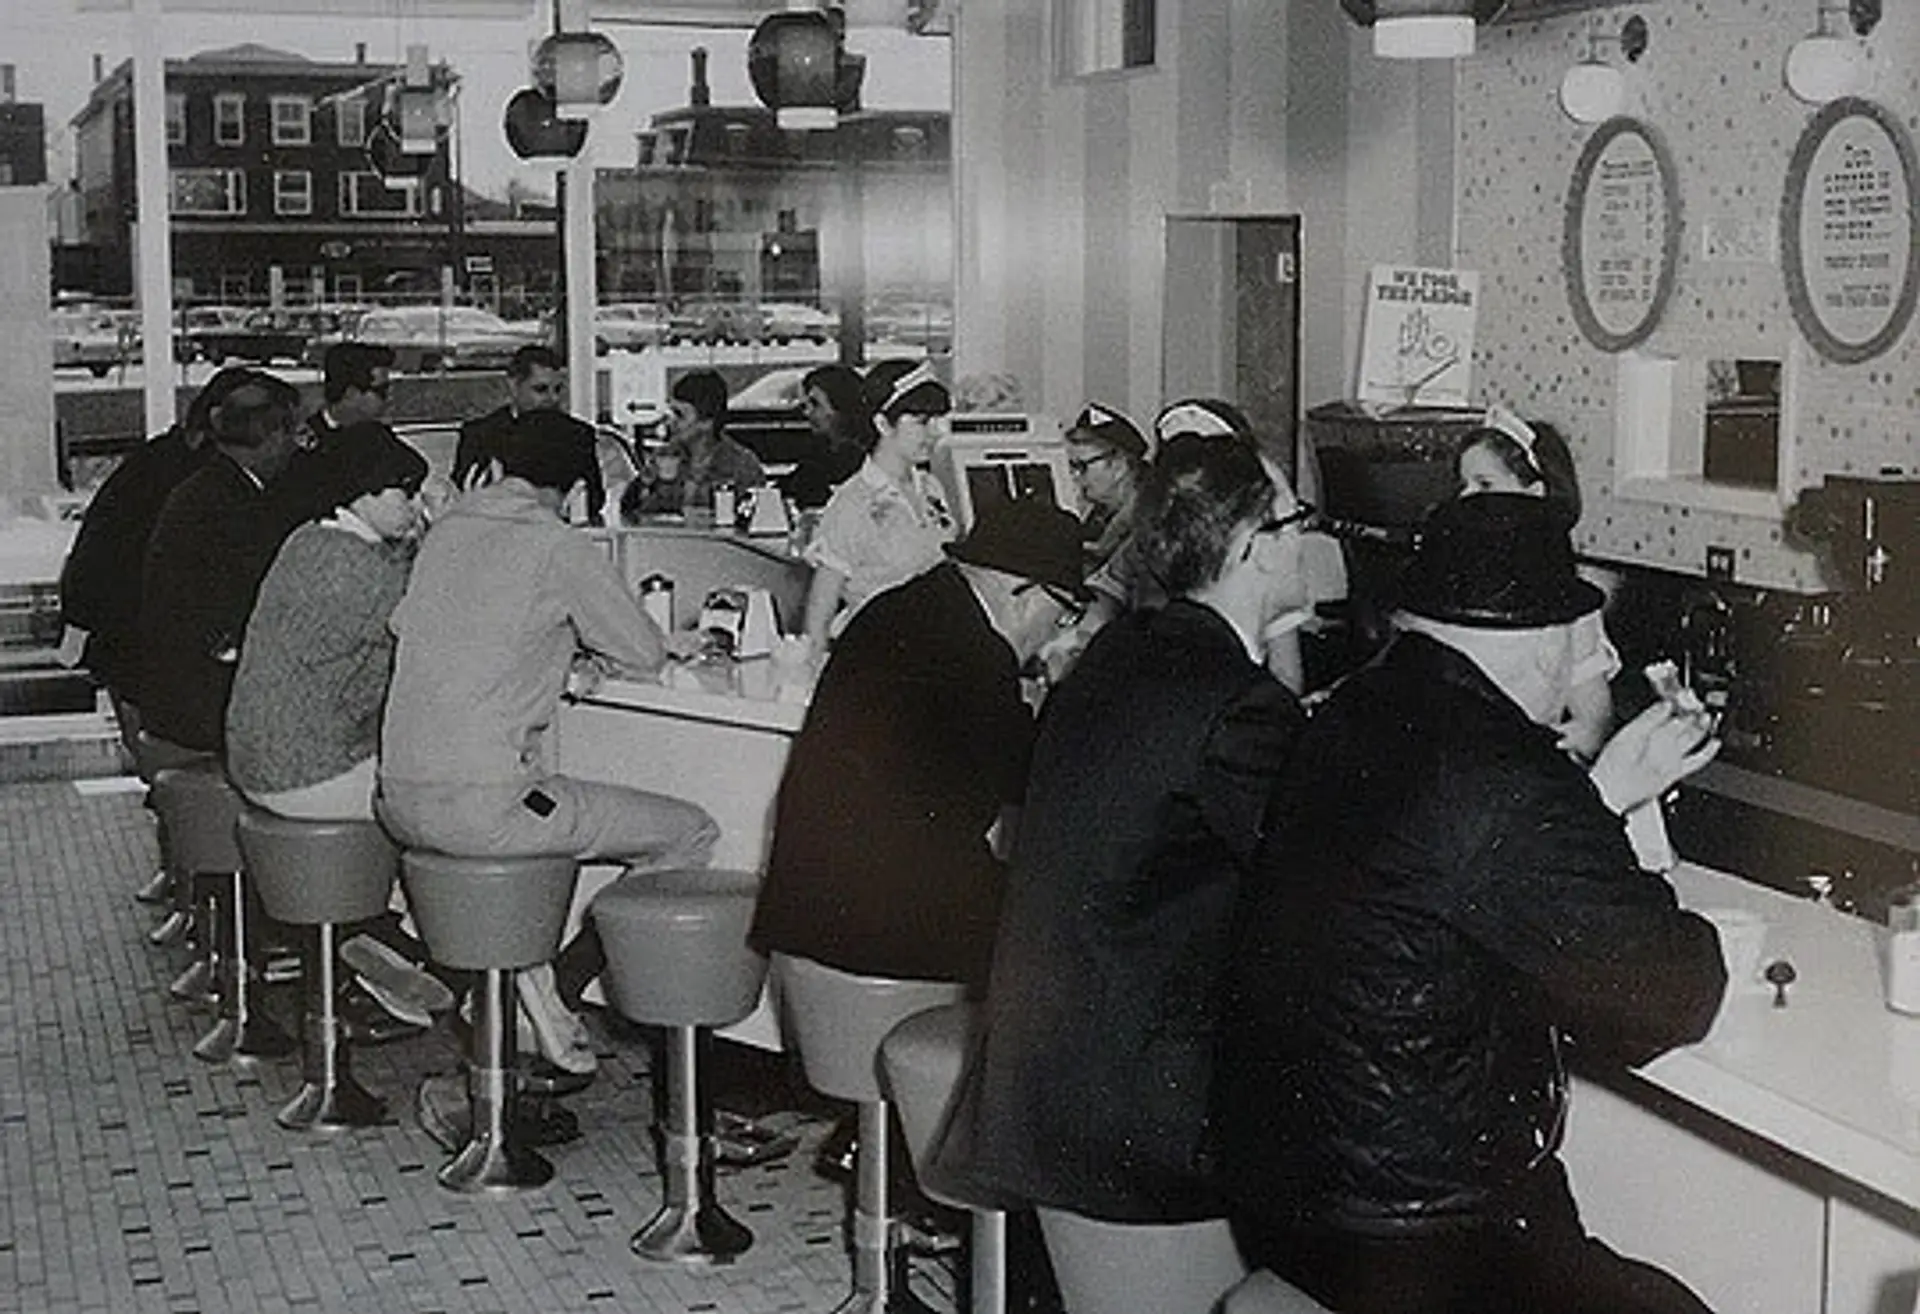 Diners at Dunkin' Donuts back in the day | Source